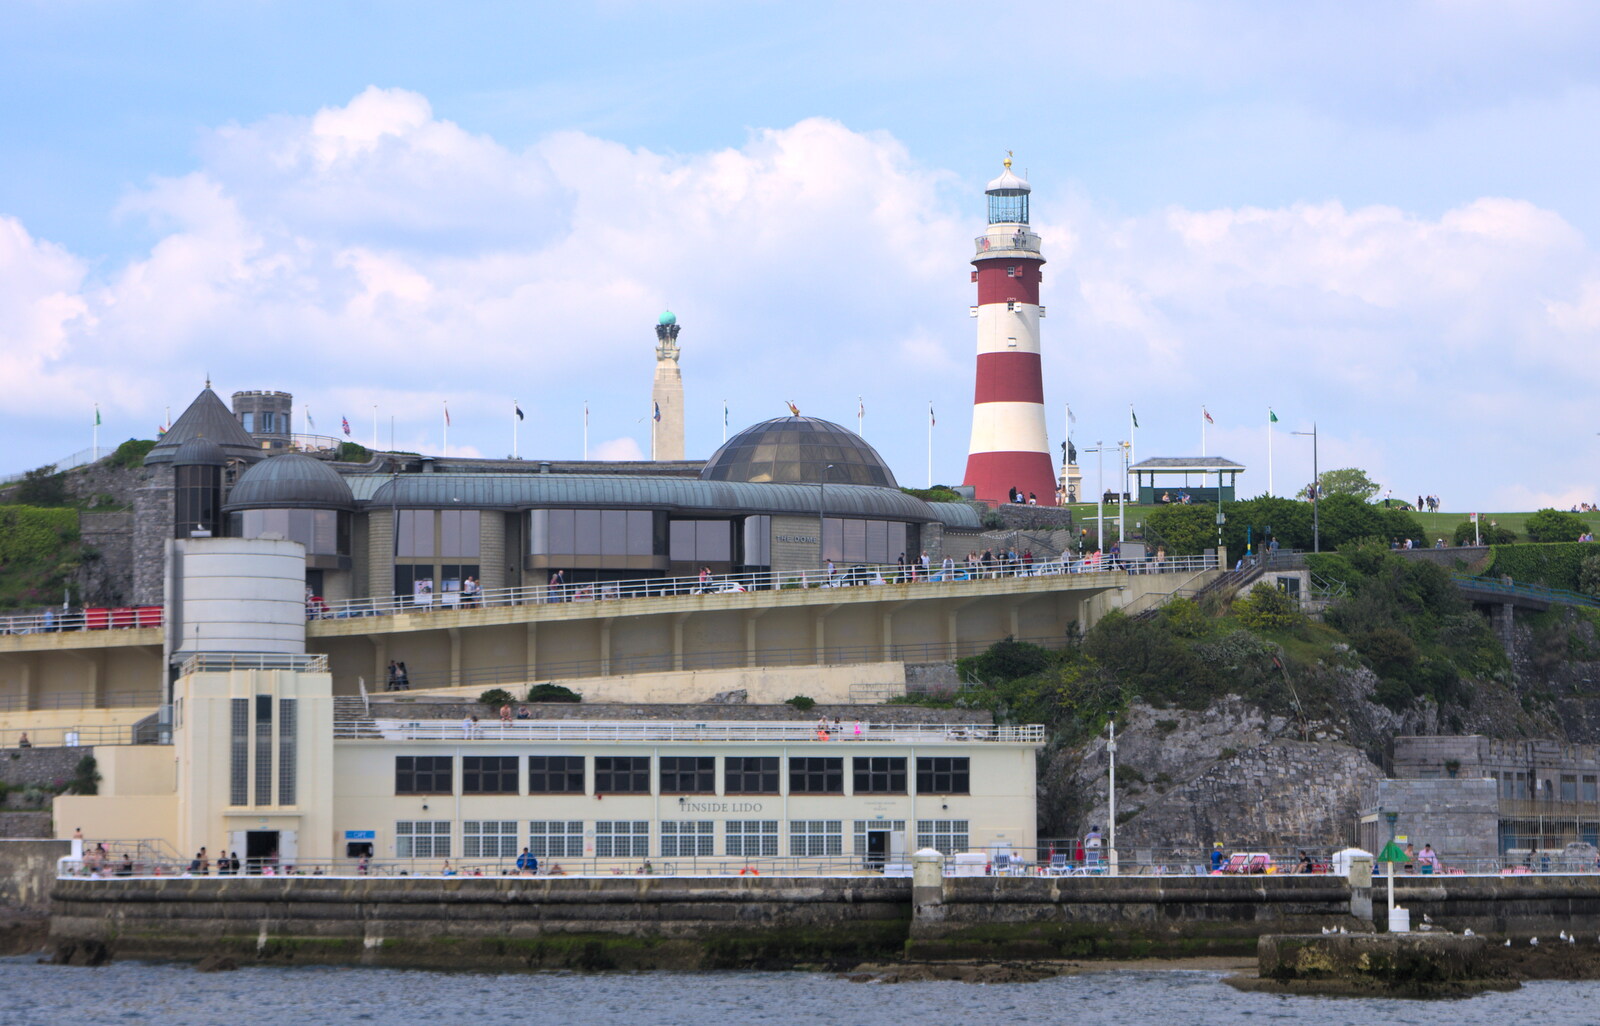 Tinside Lido from A Tamar River Trip, Plymouth, Devon - 30th May 2016